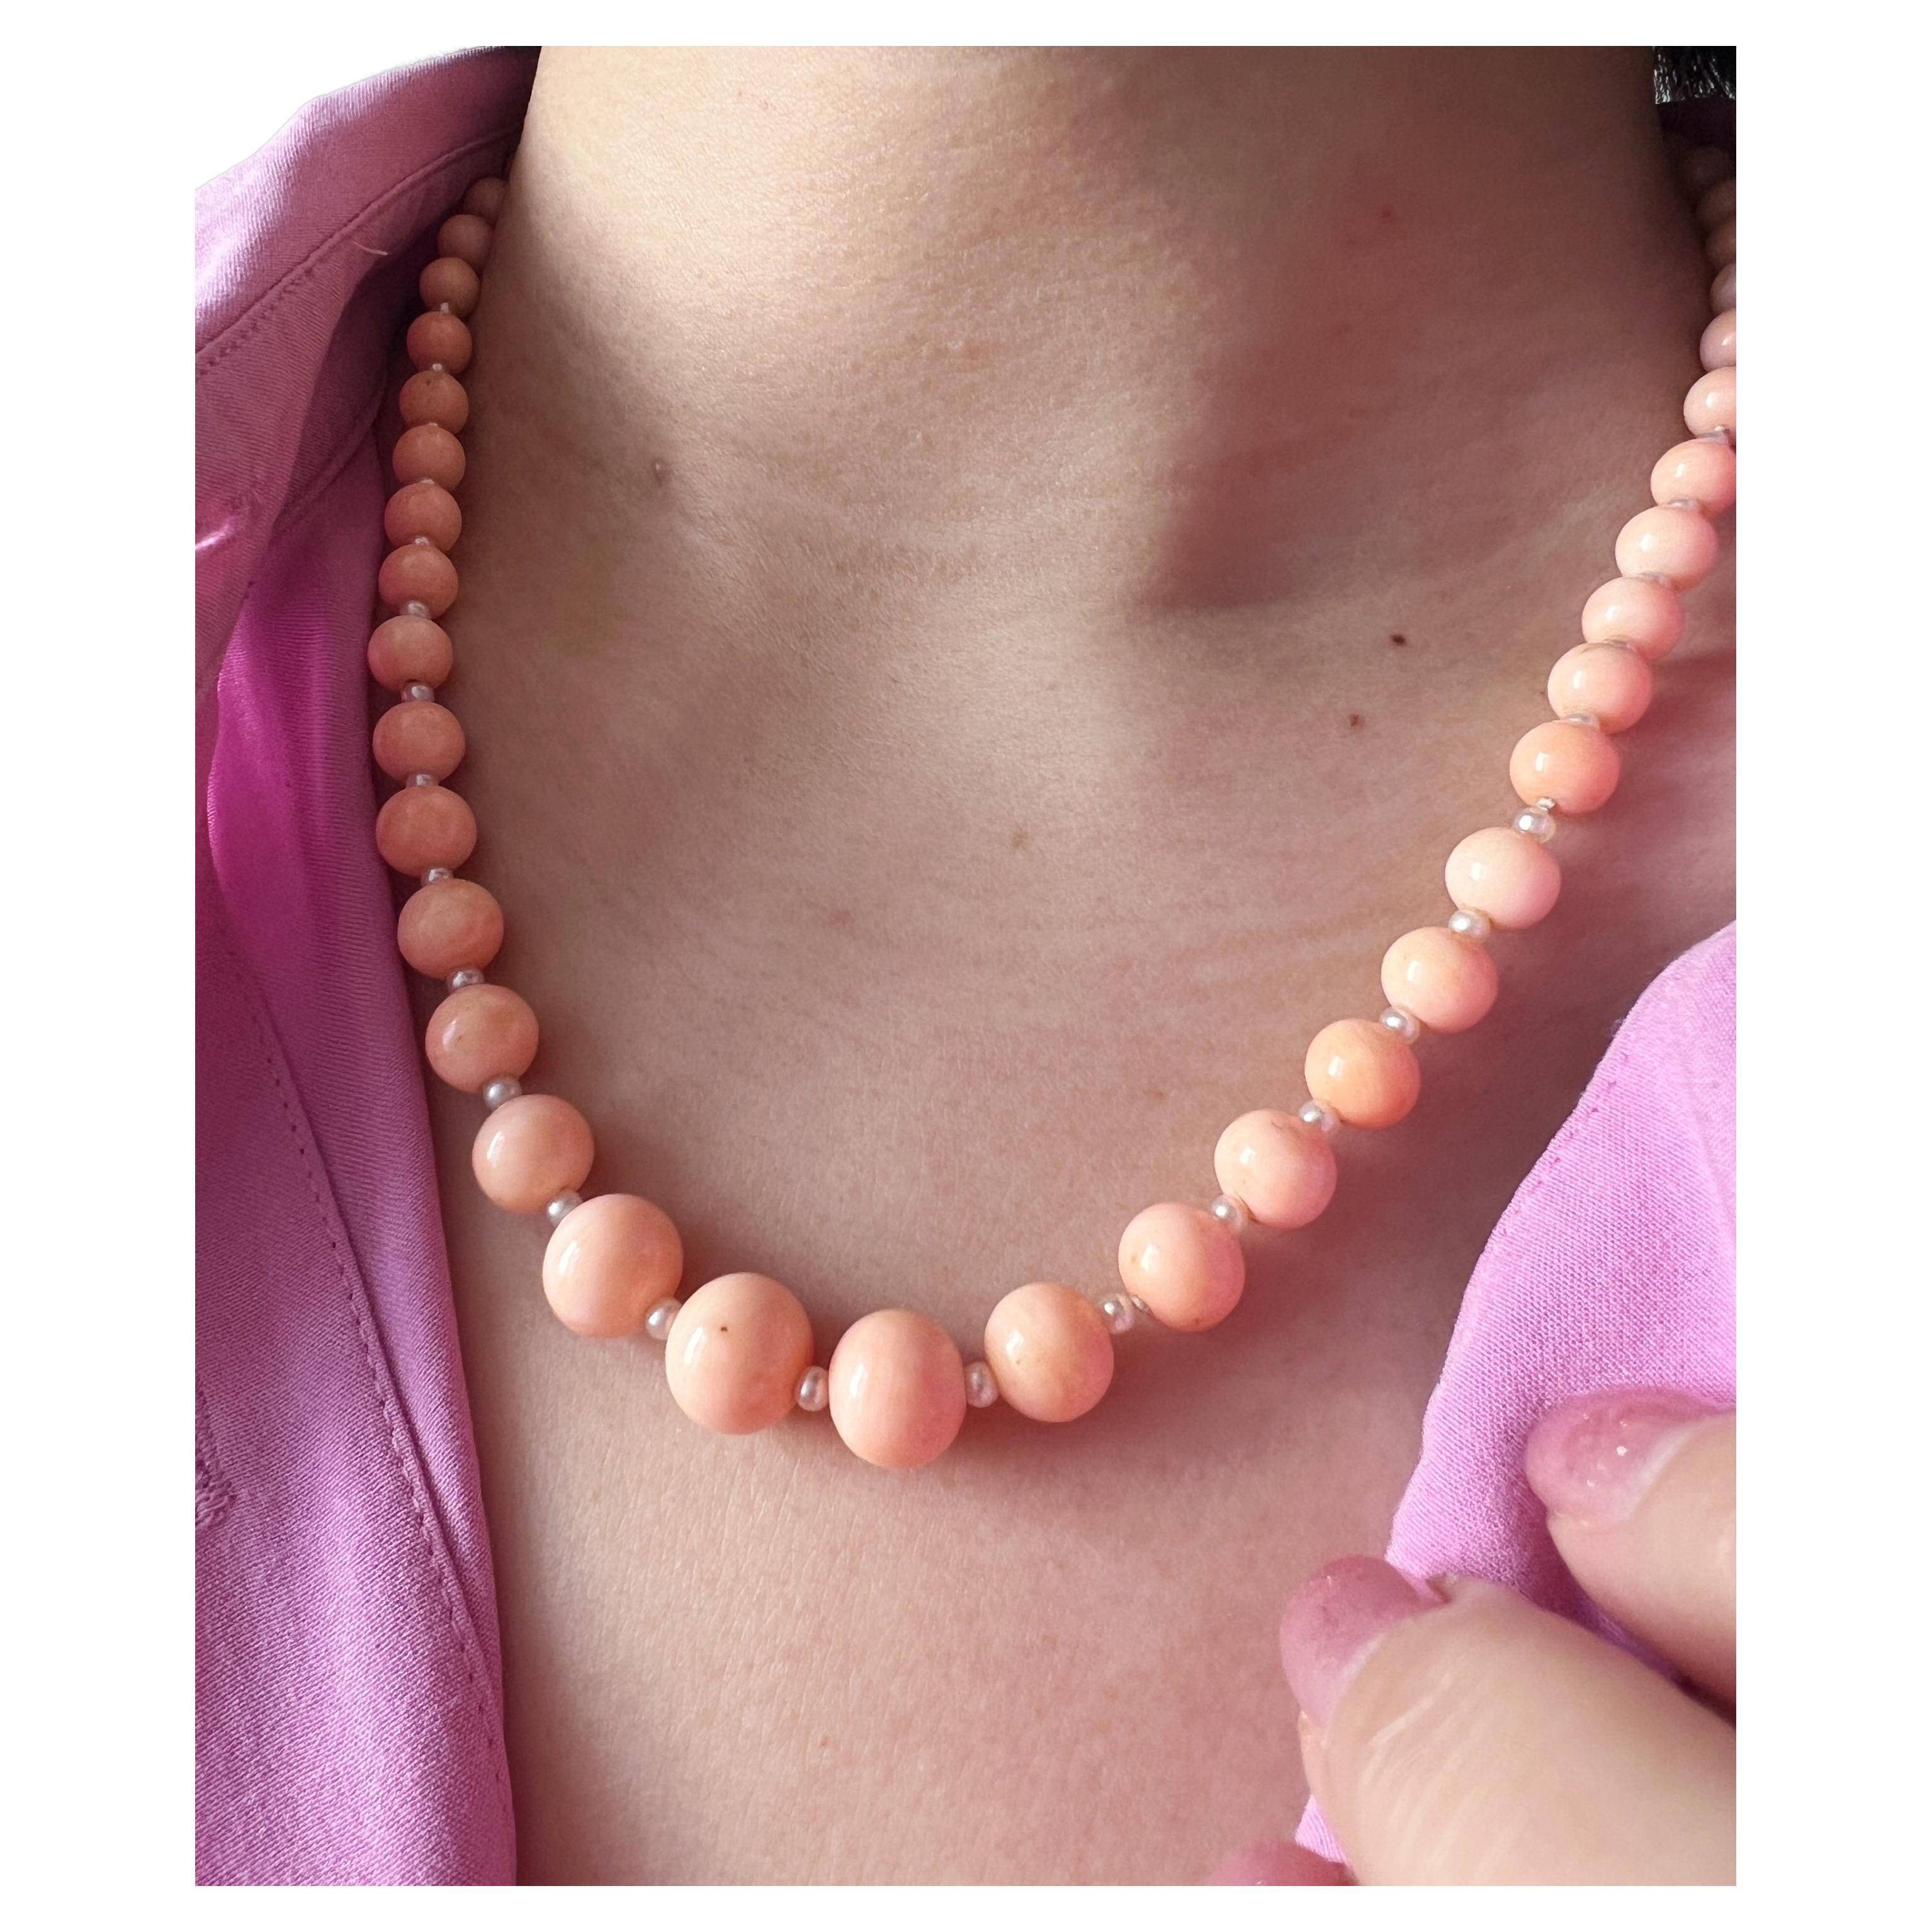 As gentle as a spring breeze, this very beautiful pink angel skin coral and pearl necklace is an easy to wear piece of jewelry which gets you ready for the upcoming Spring!

This graduated strand is composed of 55 pink coral beads measuring from 5mm